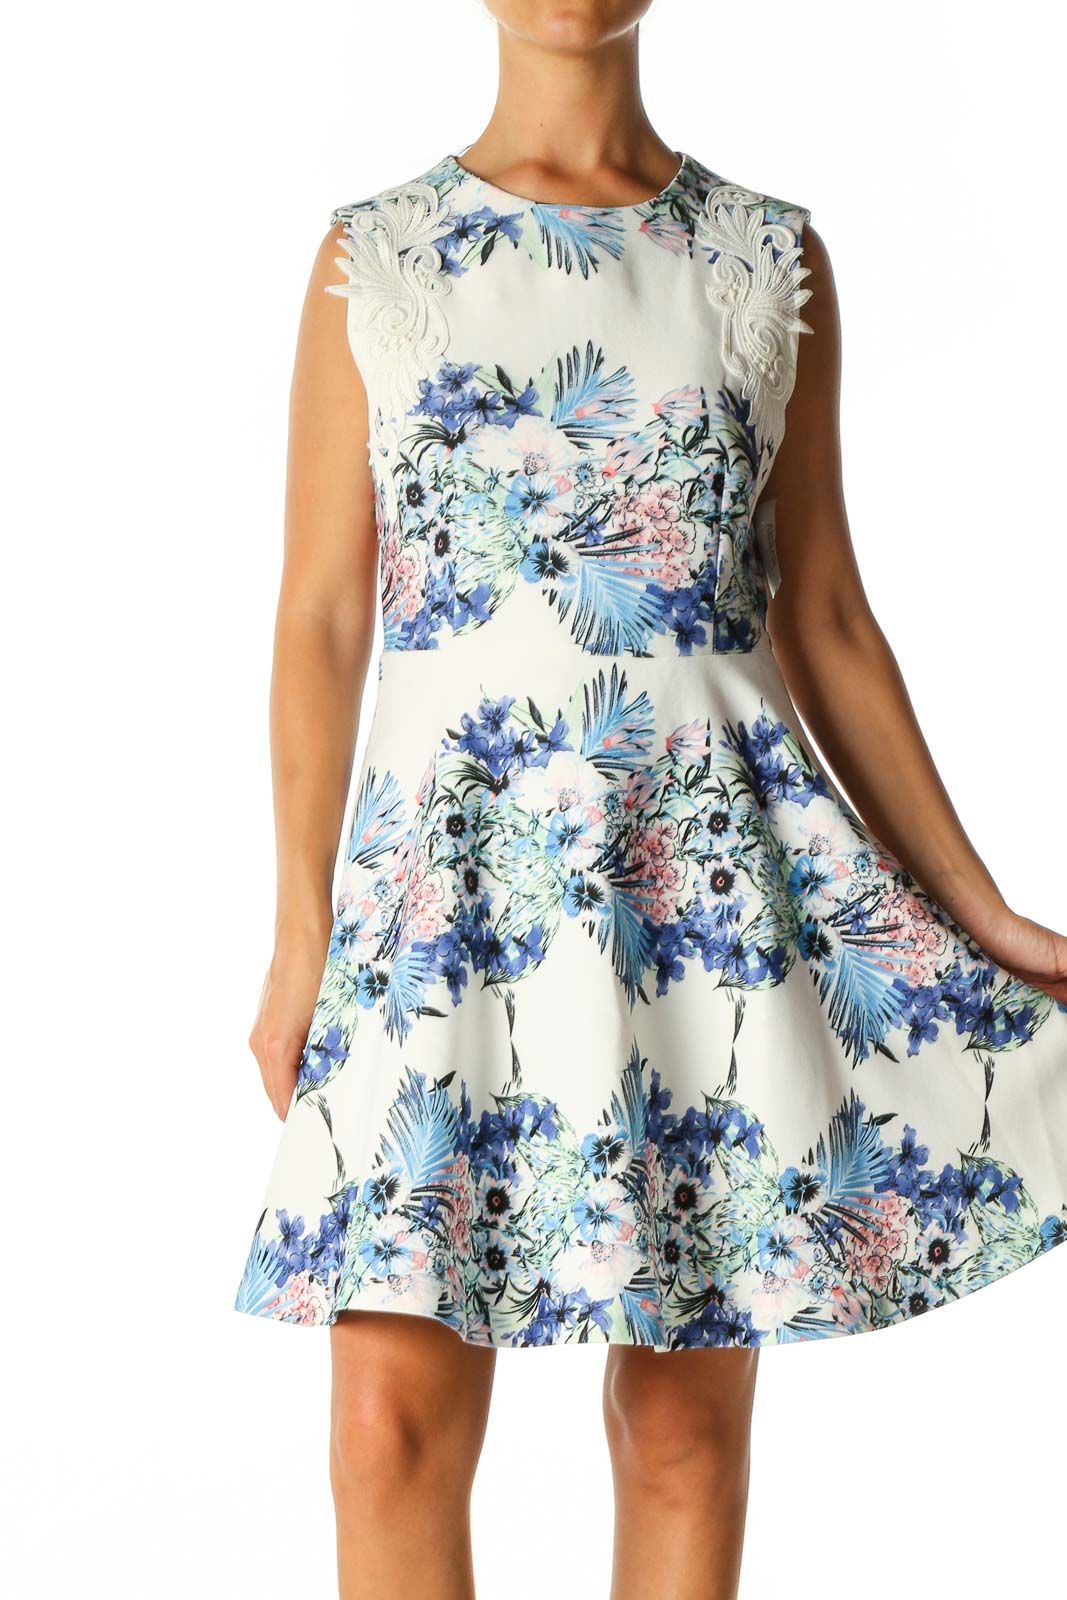 White Floral Print Casual Fit & Flare Dress Front